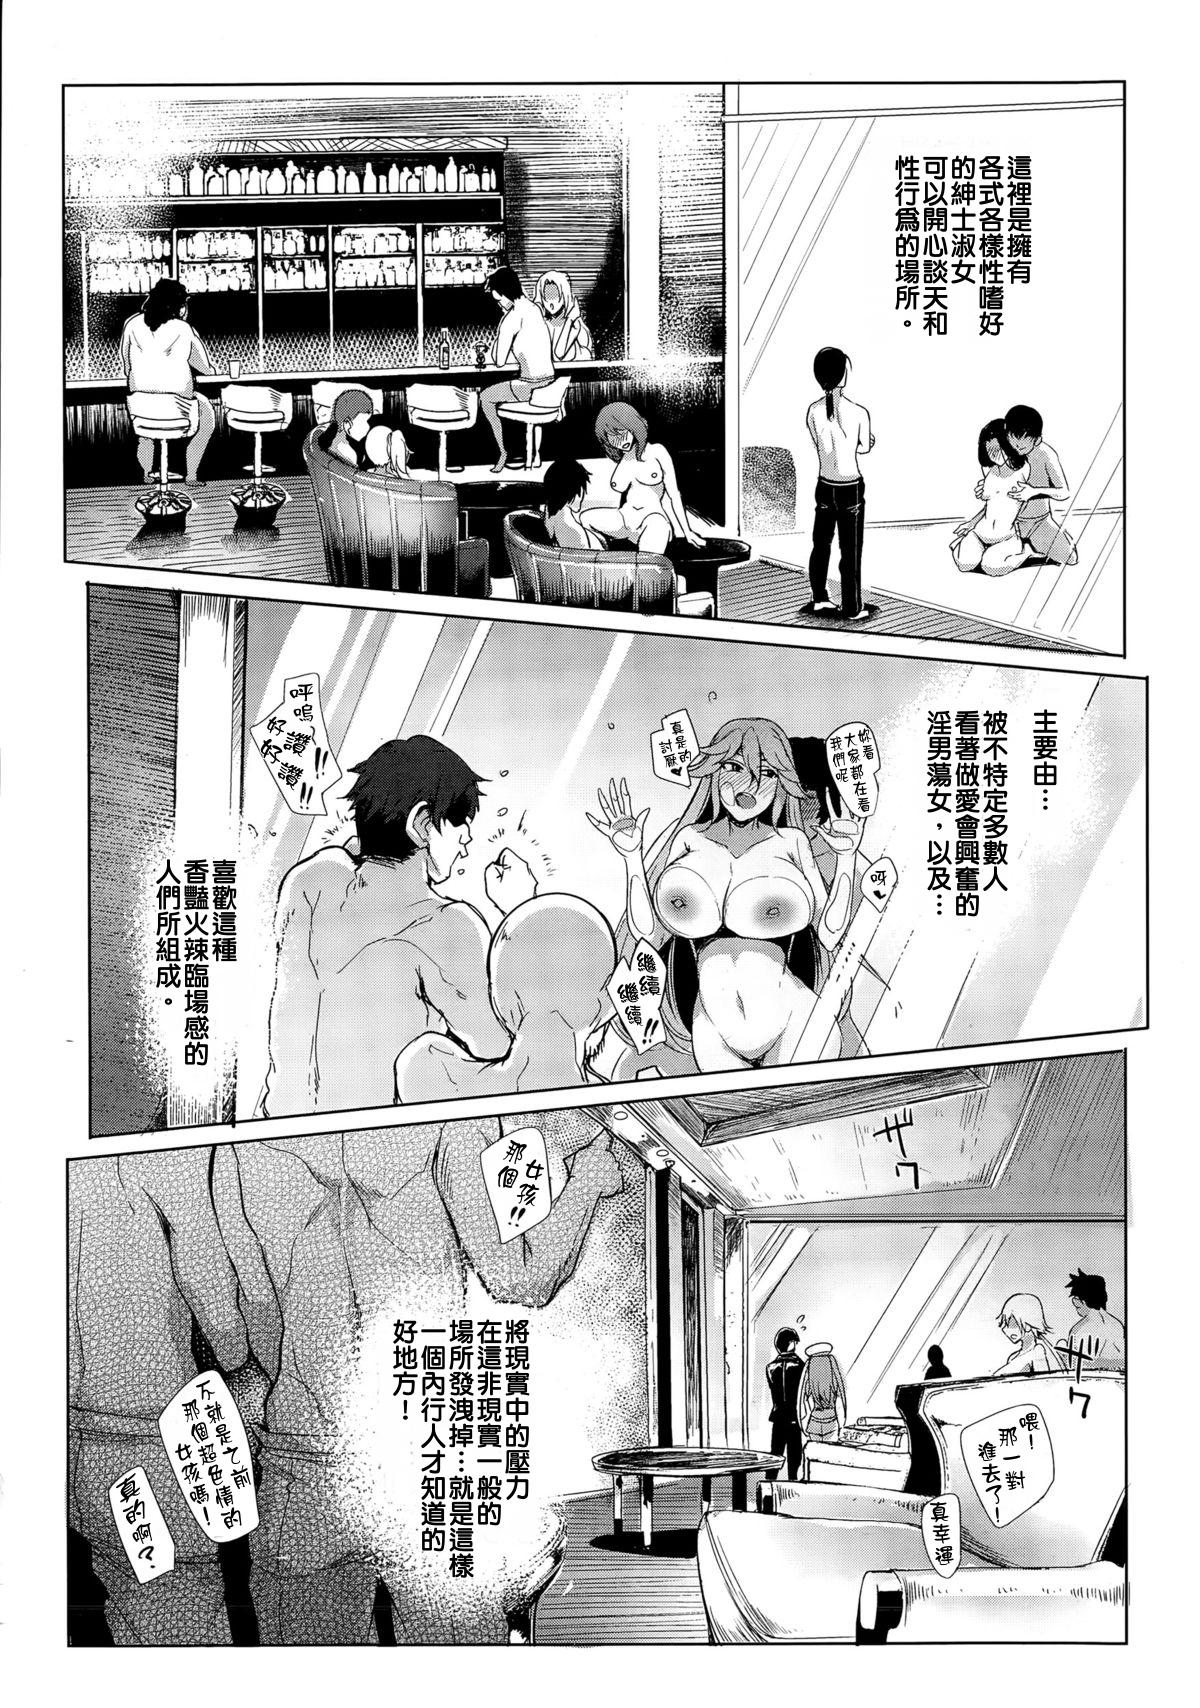 Trans Soku Hame Gal Bitch ! ＋ Mise Hame Gal Bitch ! | One-Night Stand with a Gyaru Slut! + Fucking a Gyaru Slut! + Gals Bitch After Oshiri Hen | Gyaru Slut! After Butt Edition Asiansex - Page 7